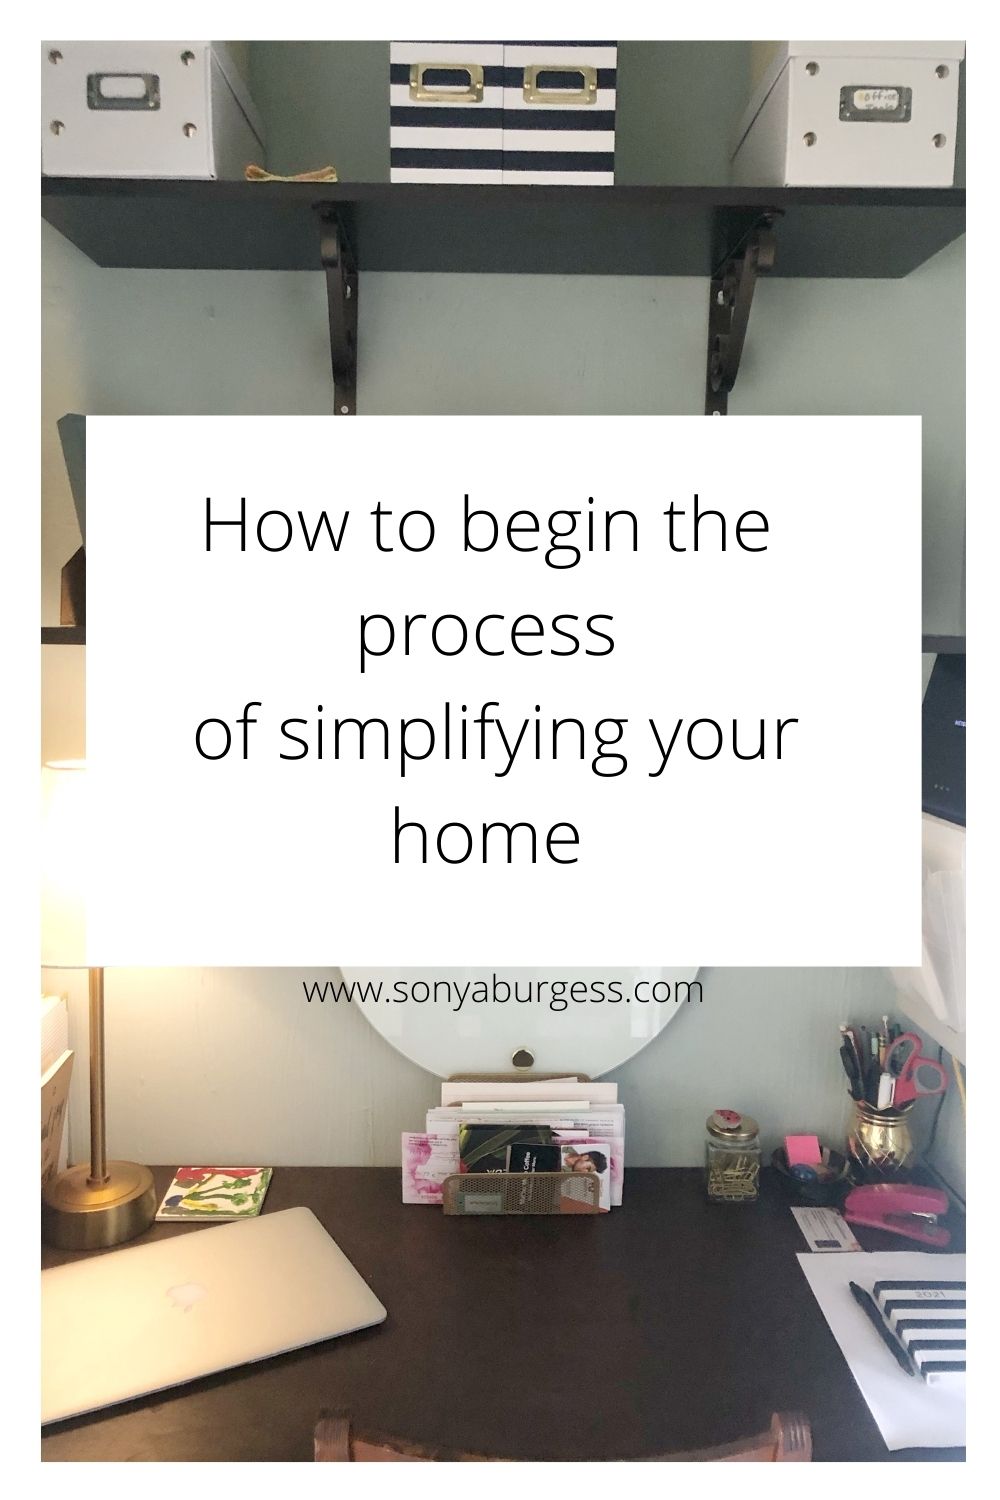 How to begin the process of simplifying your home